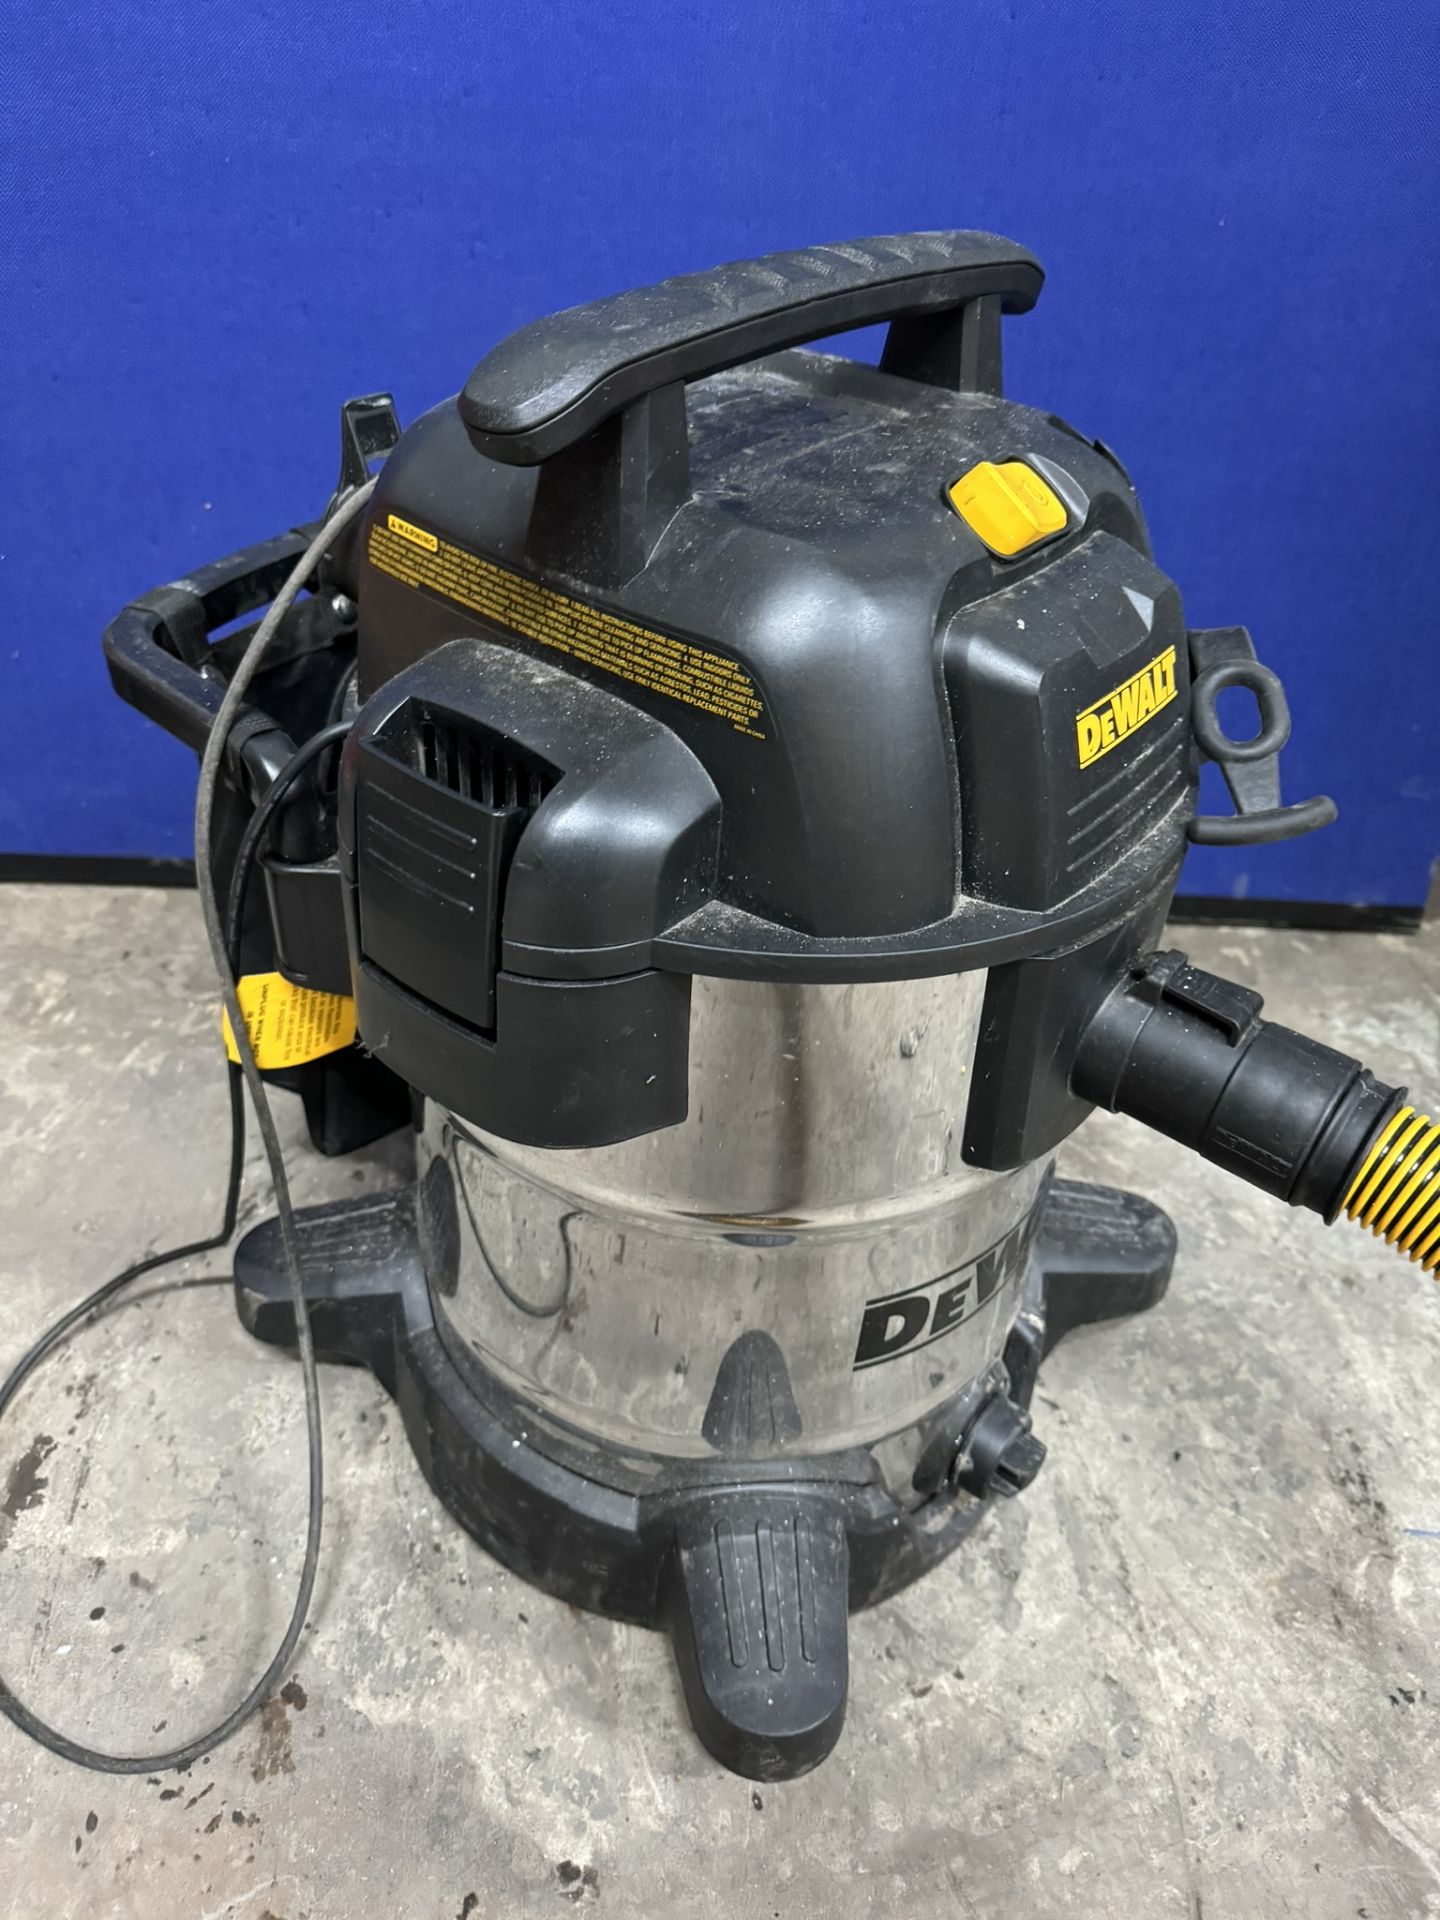 Dewalt DXV38S Wet And Dry Vacuum Cleaner - Image 3 of 5